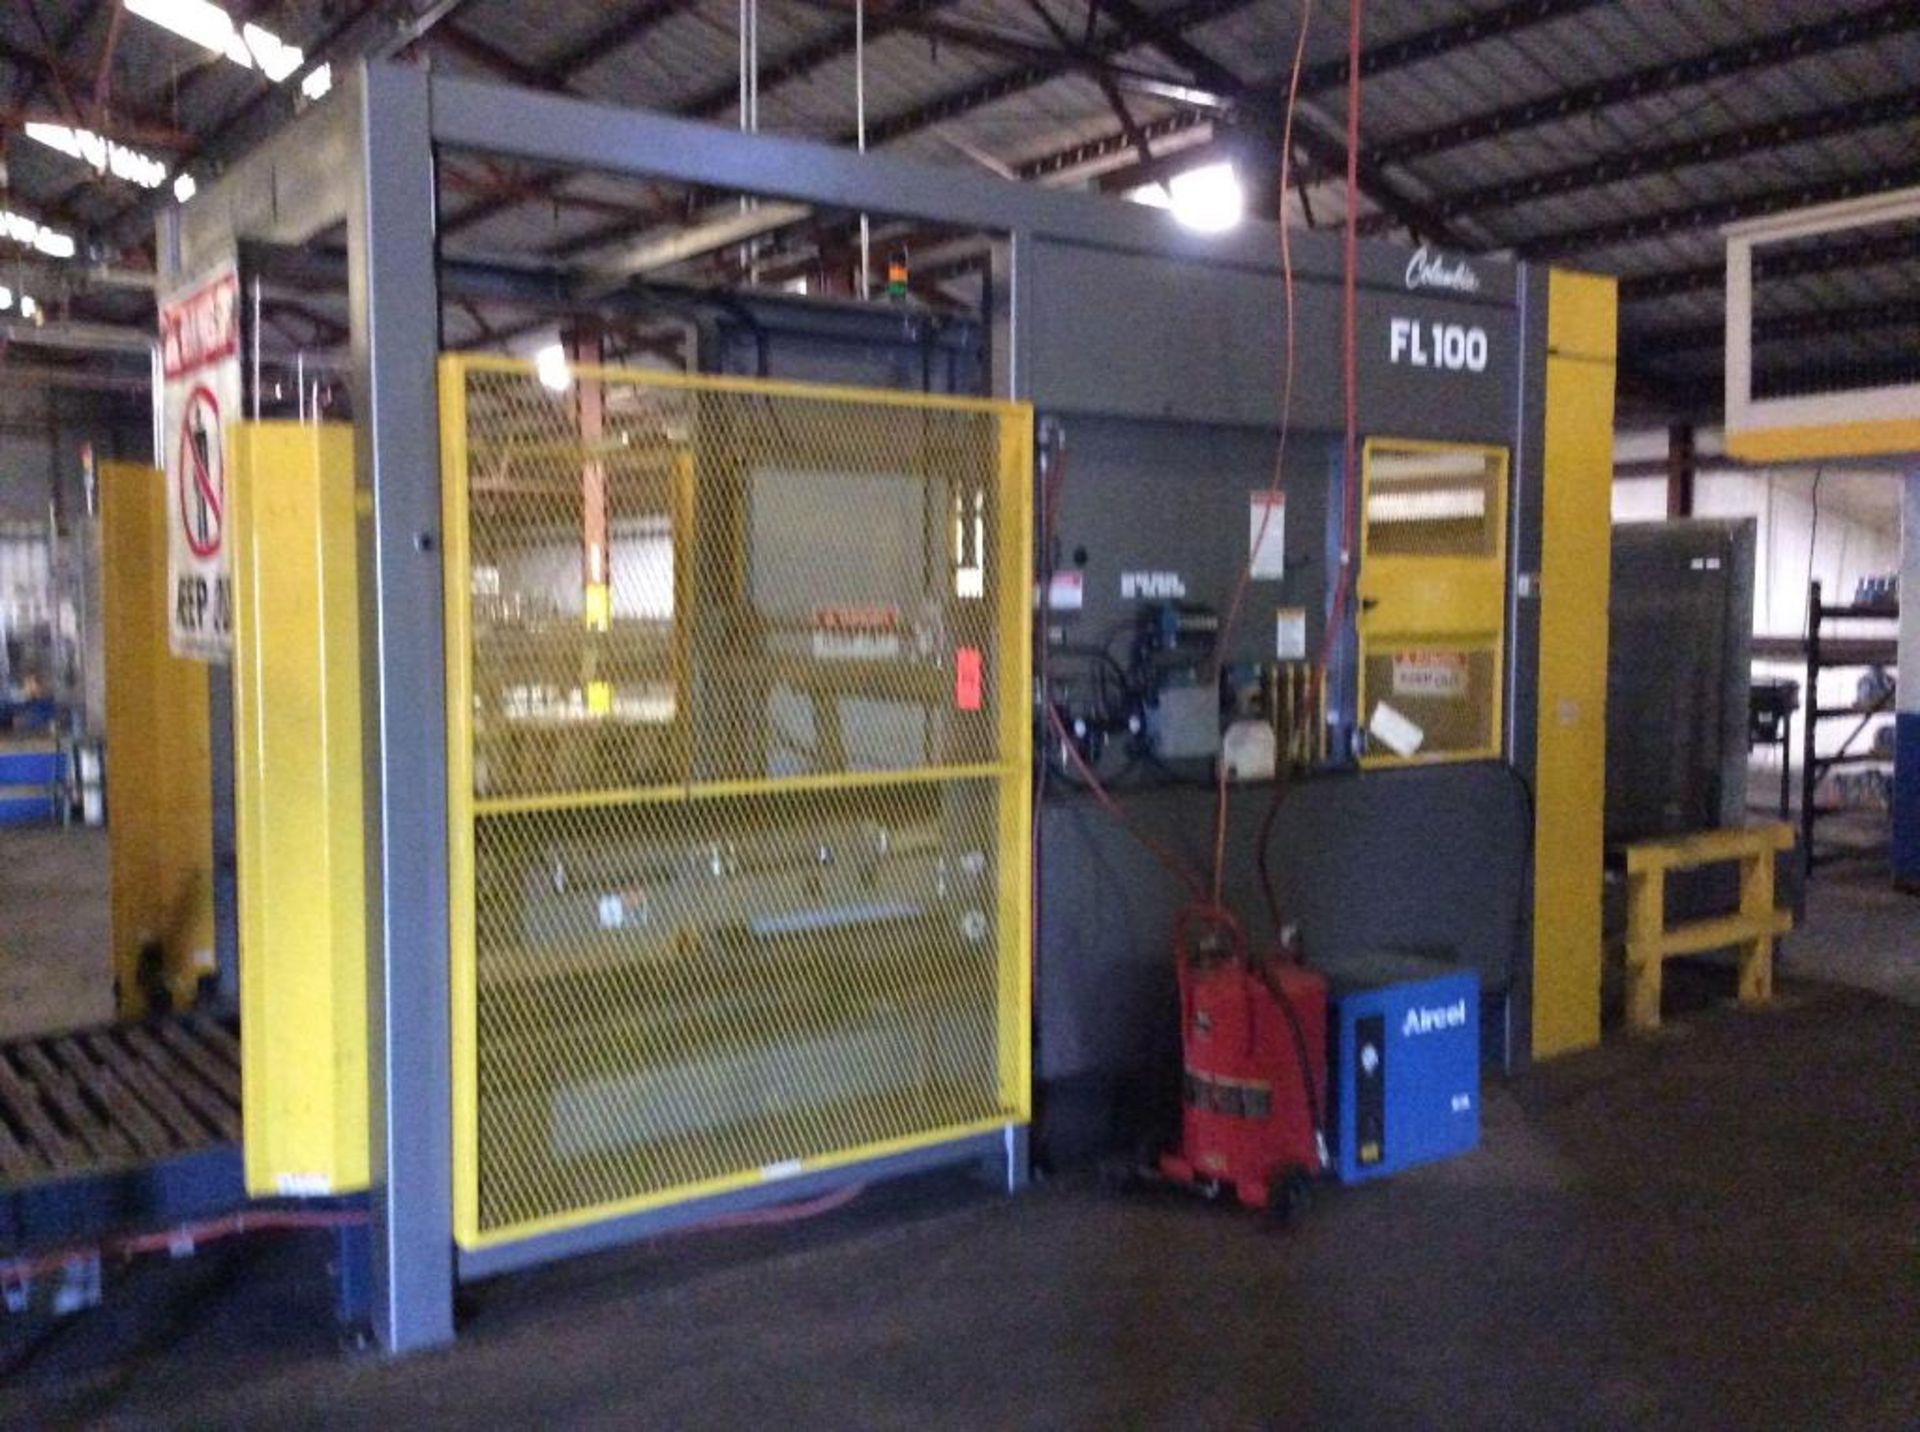 Columbia Automatic Case Palletizer, mn FL100-LR-AB, sn 0405-6316-2361, including 86" long x 16" wide - Image 3 of 6